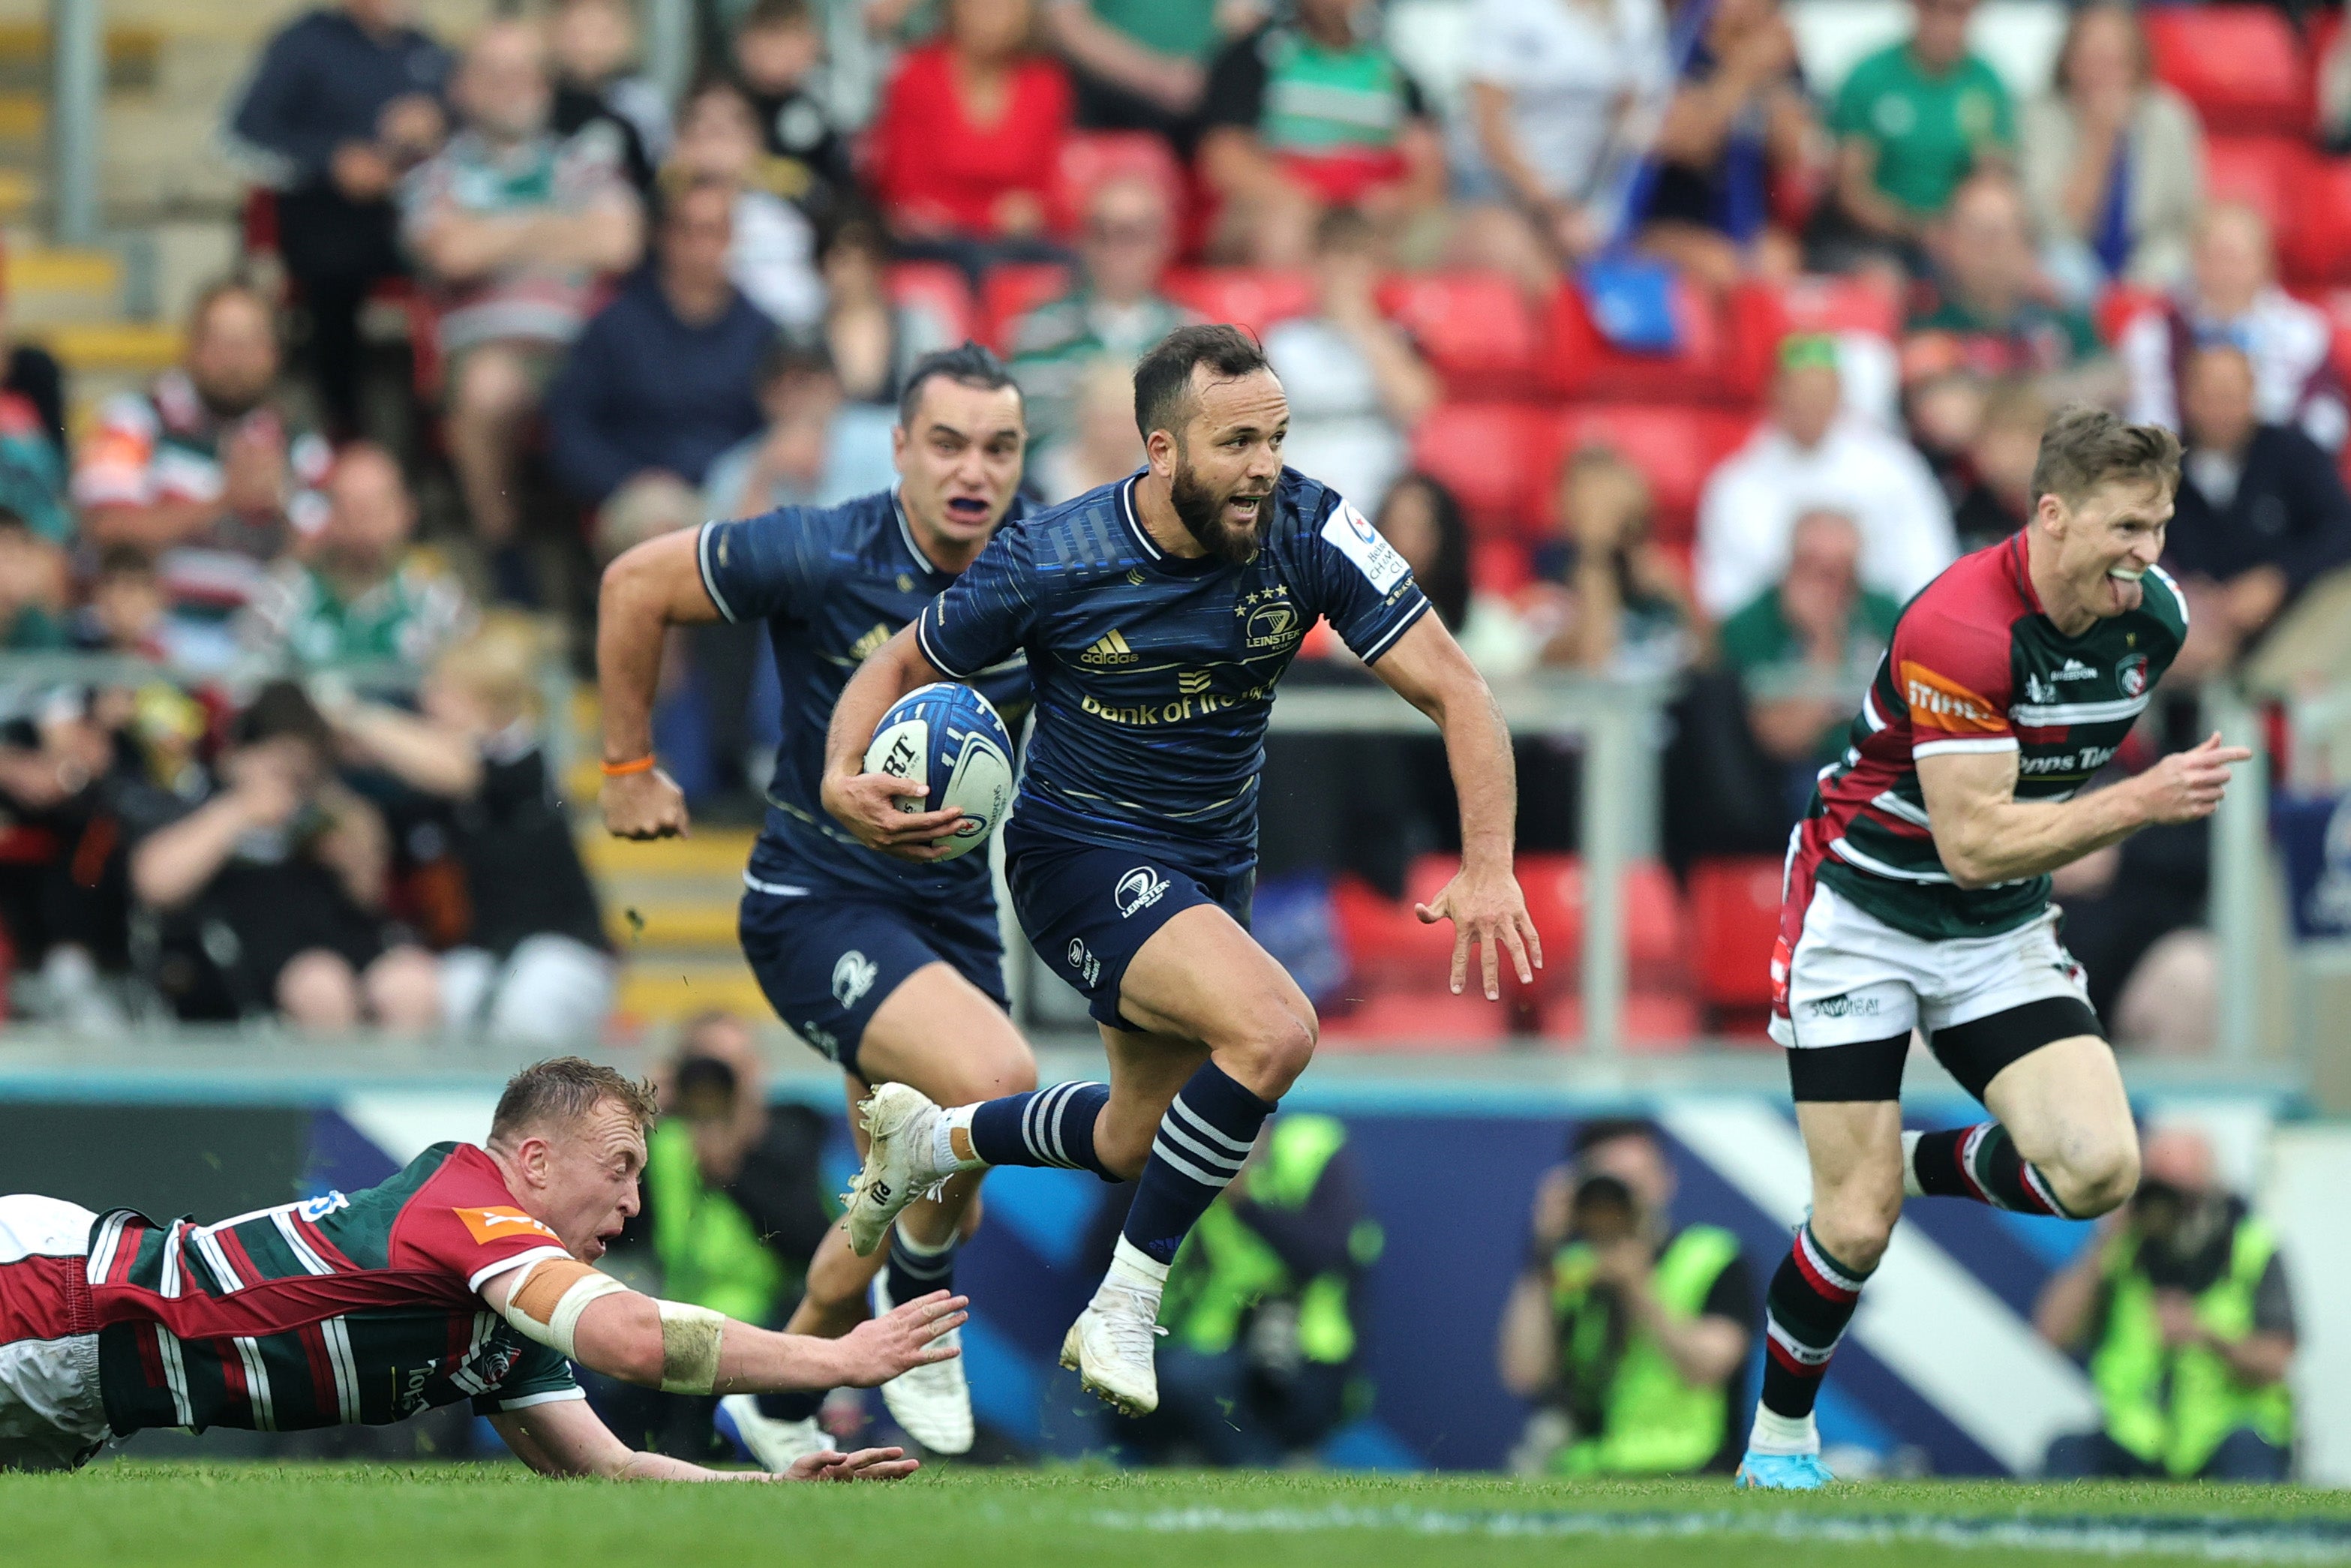 Leinster recorded an impressive win over Leicester Tigers